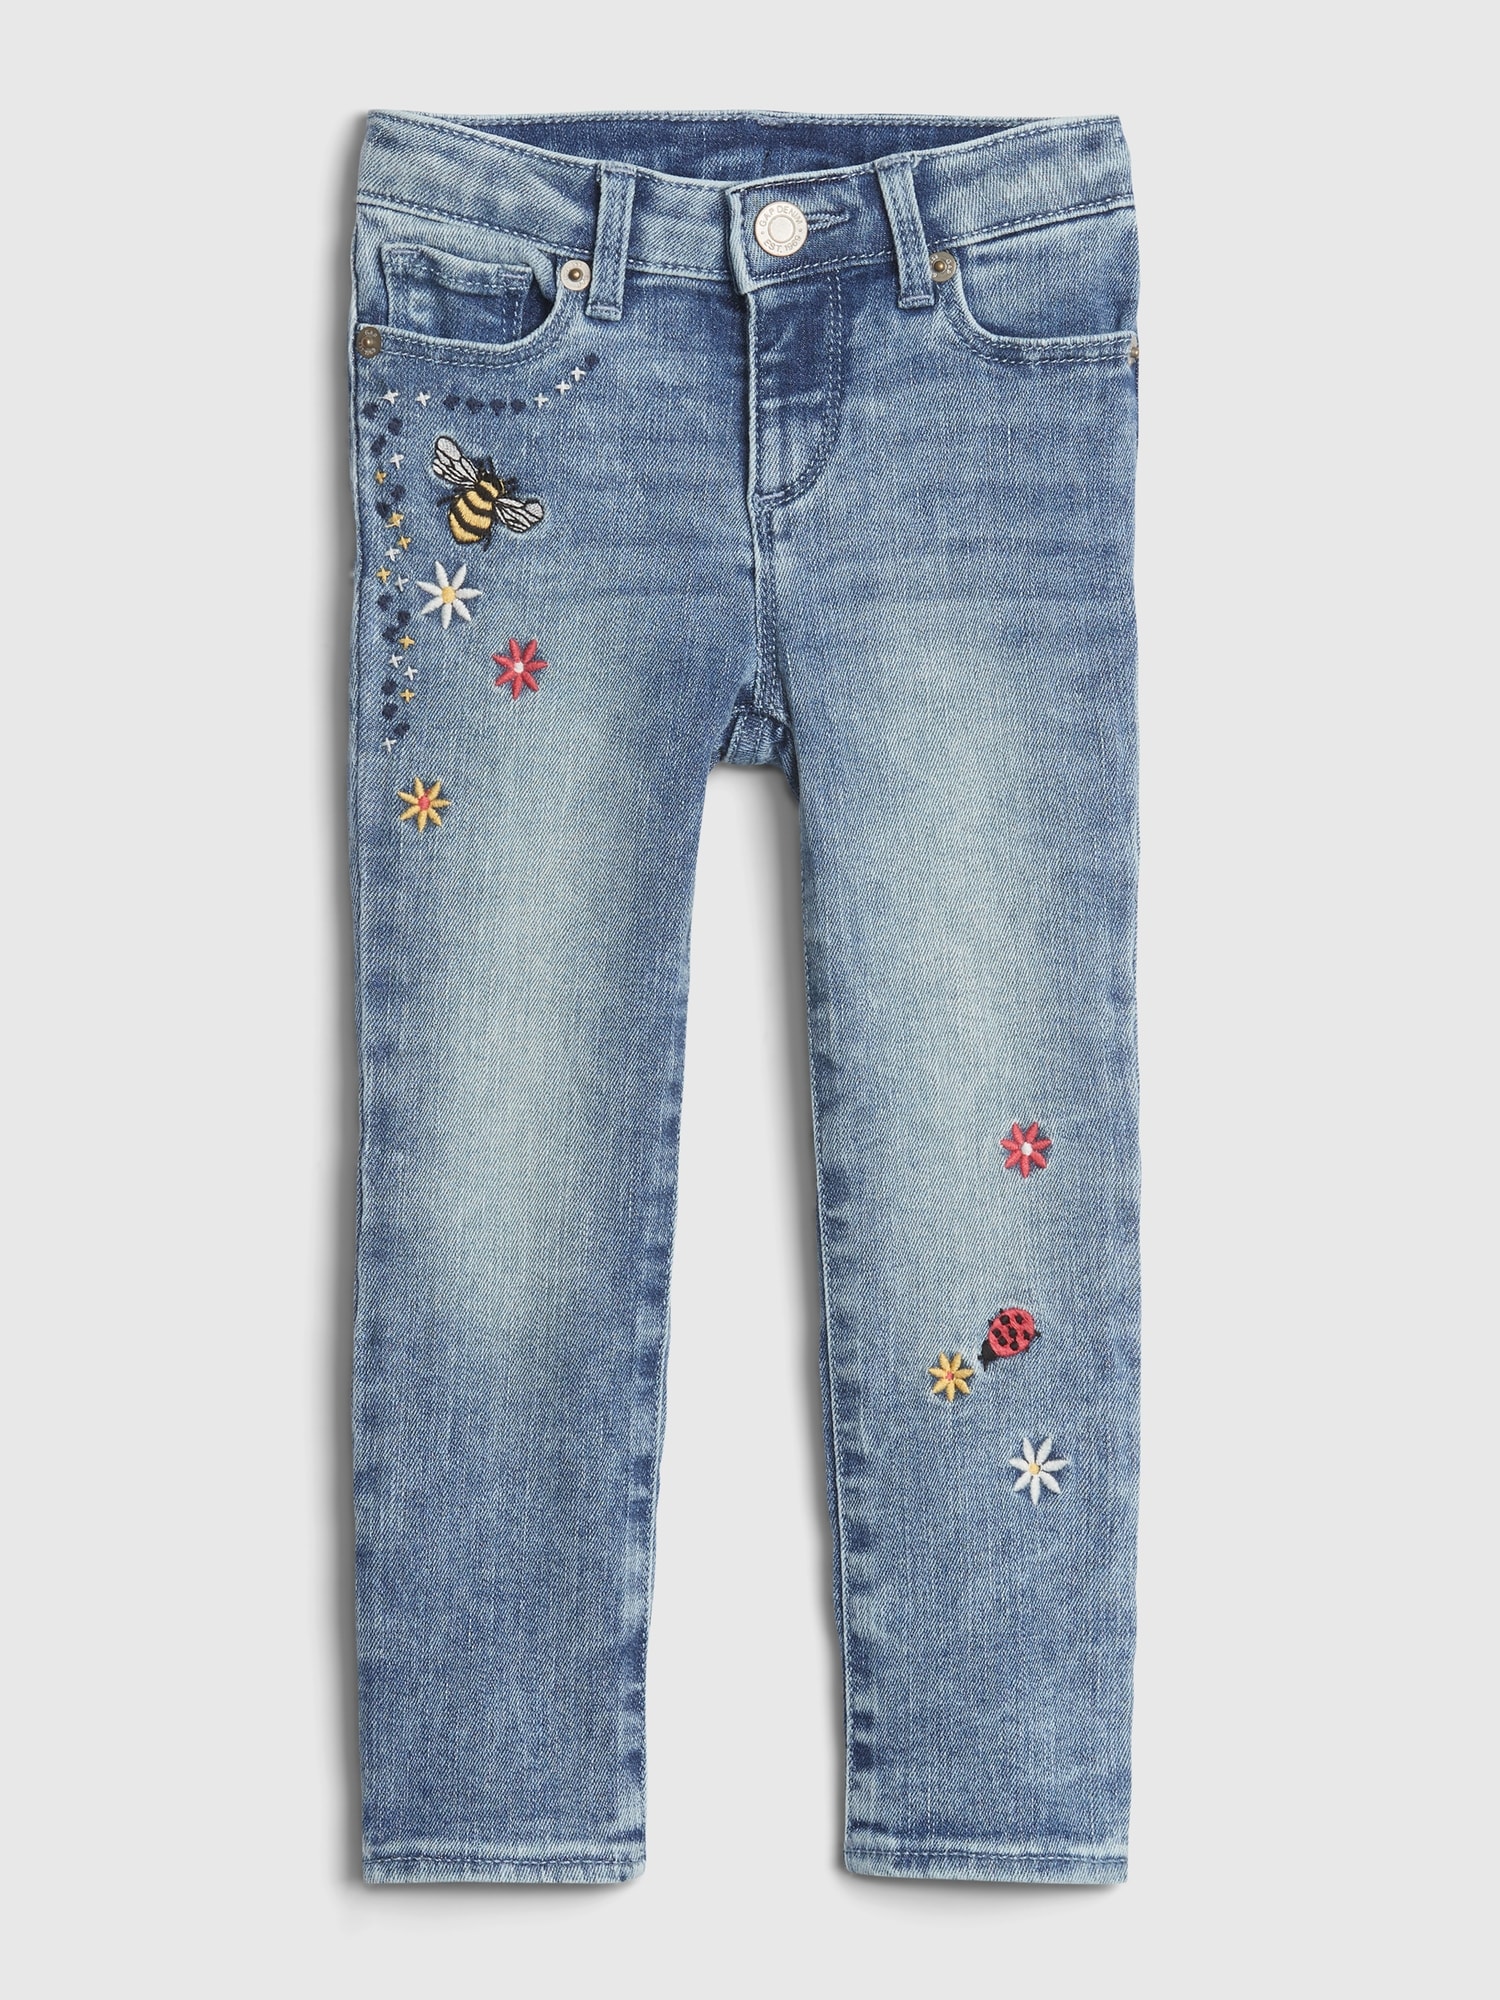 snap on jeans